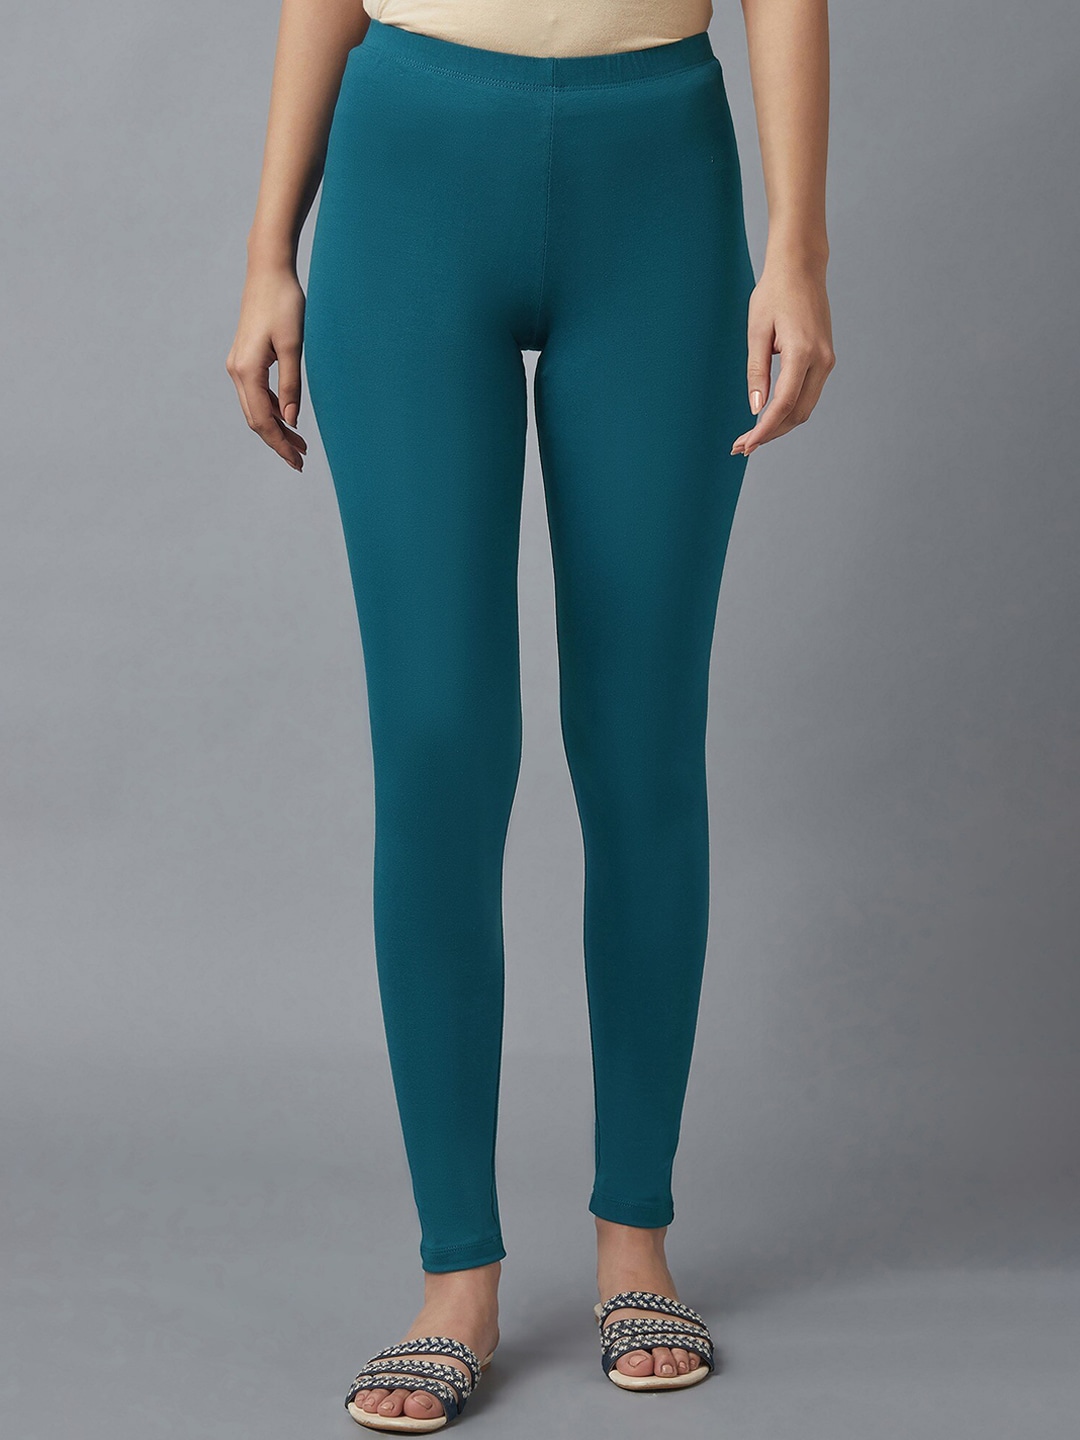 elleven Women Blue Solid Ankle Length Leggings Price in India